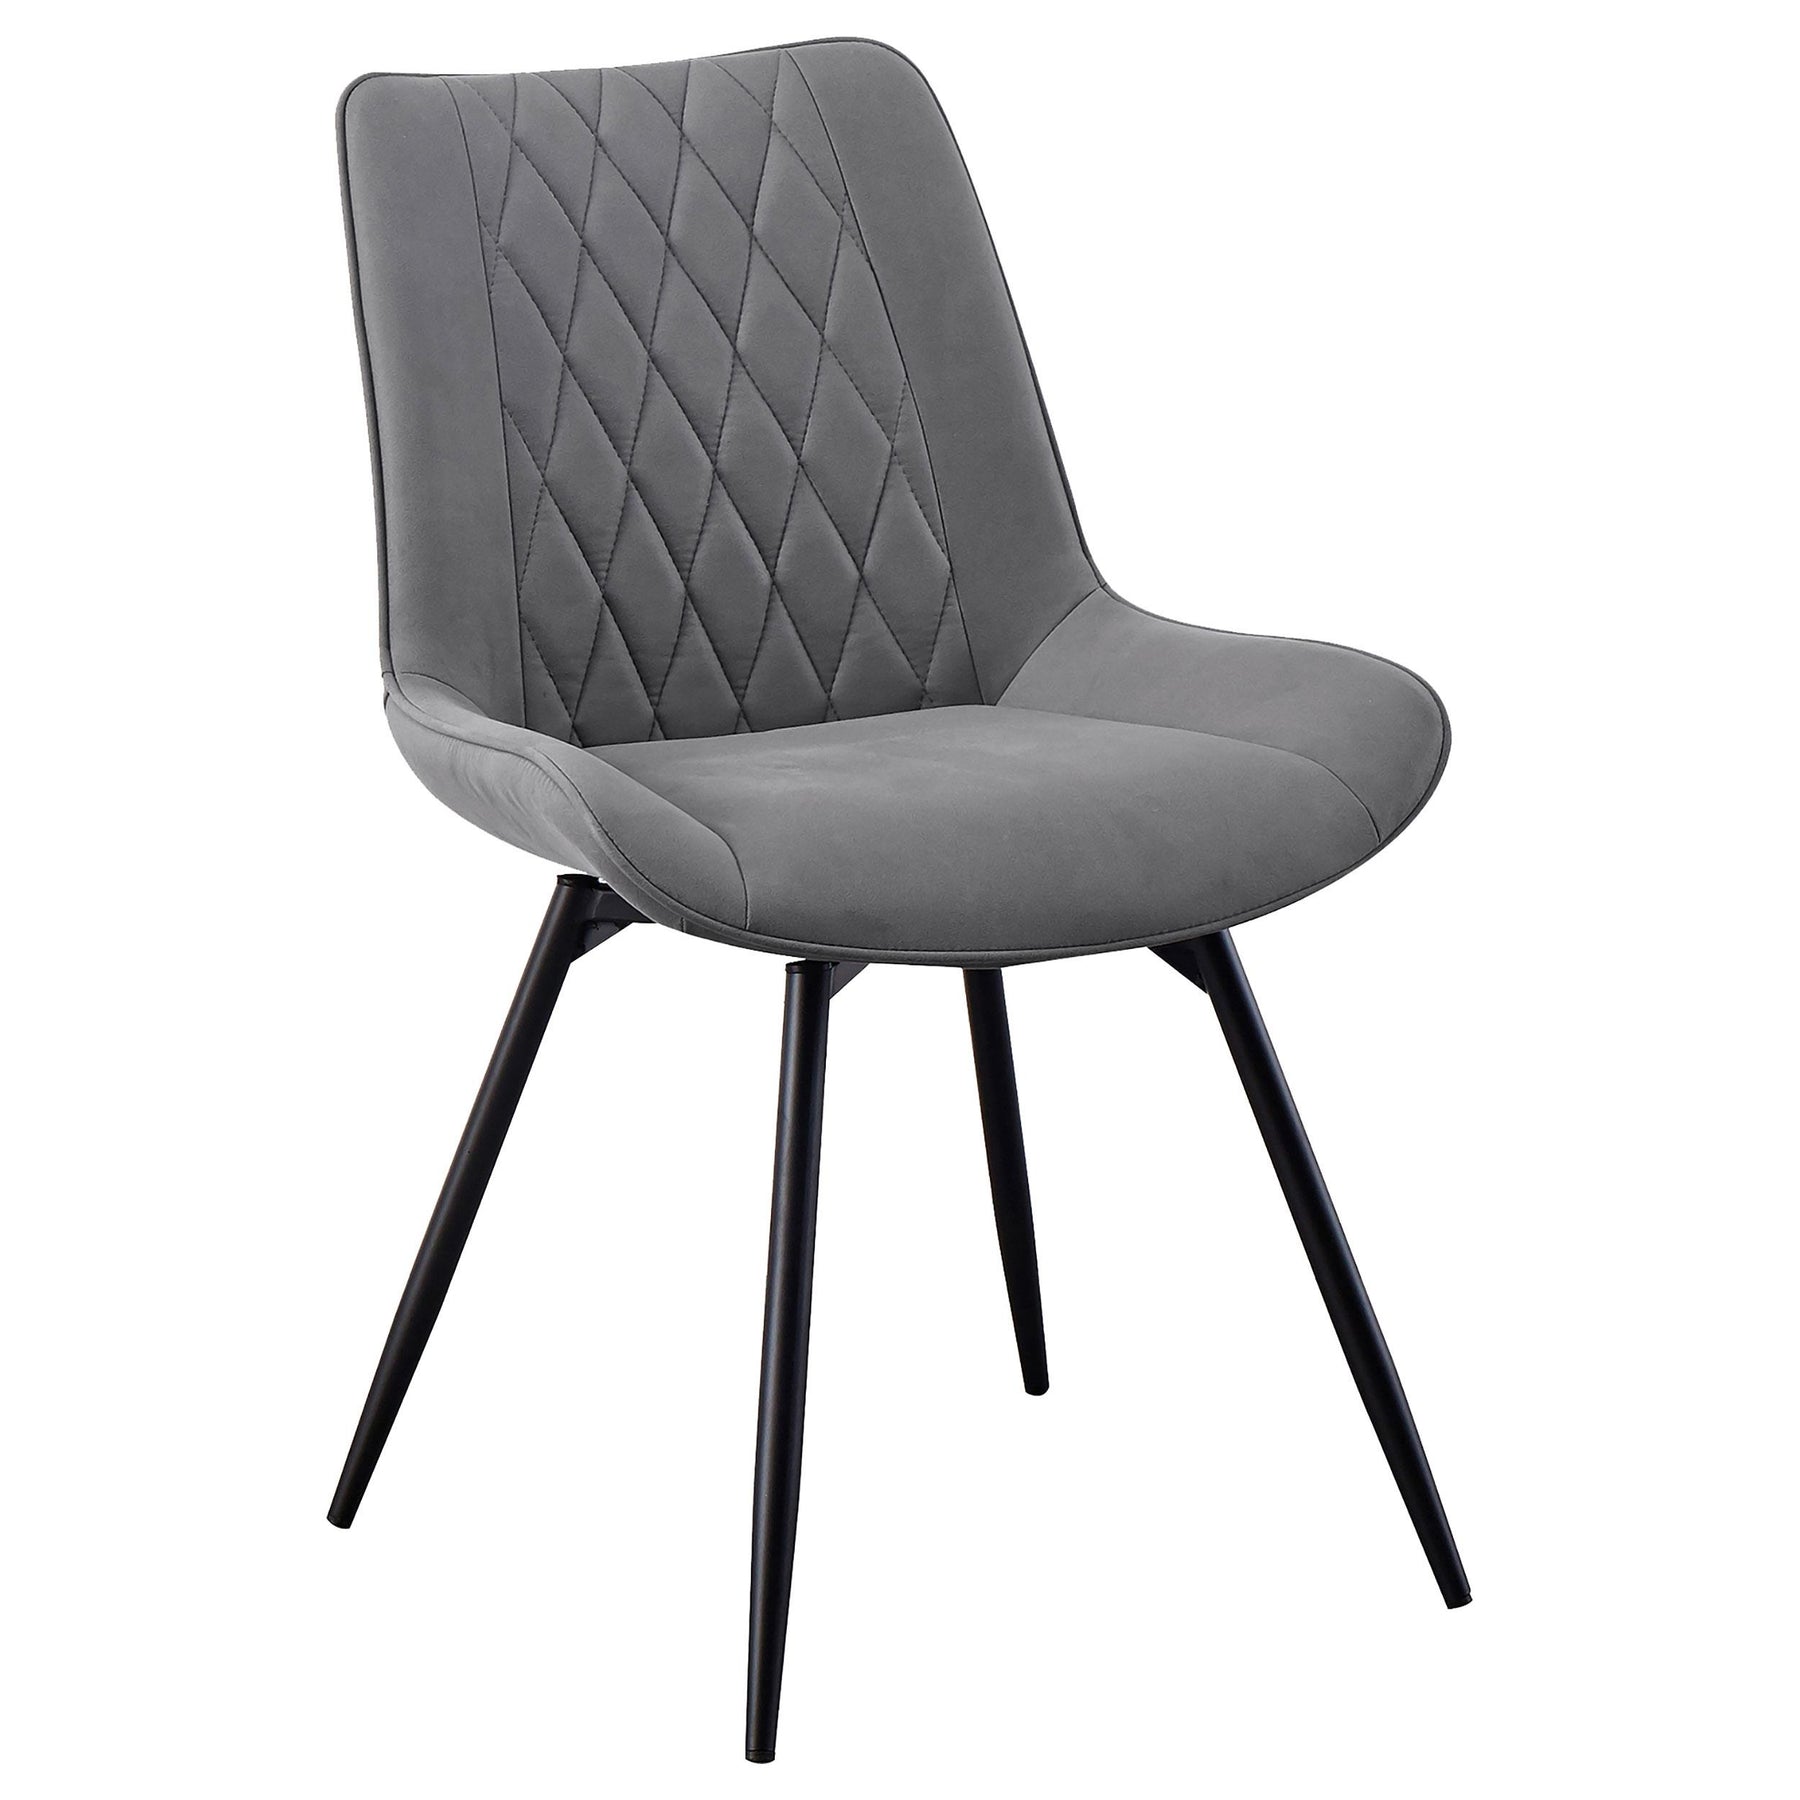 Diggs Upholstered Tufted Swivel Dining Chairs Grey and Gunmetal (Set of 2) Diggs Upholstered Tufted Swivel Dining Chairs Grey and Gunmetal (Set of 2) Half Price Furniture